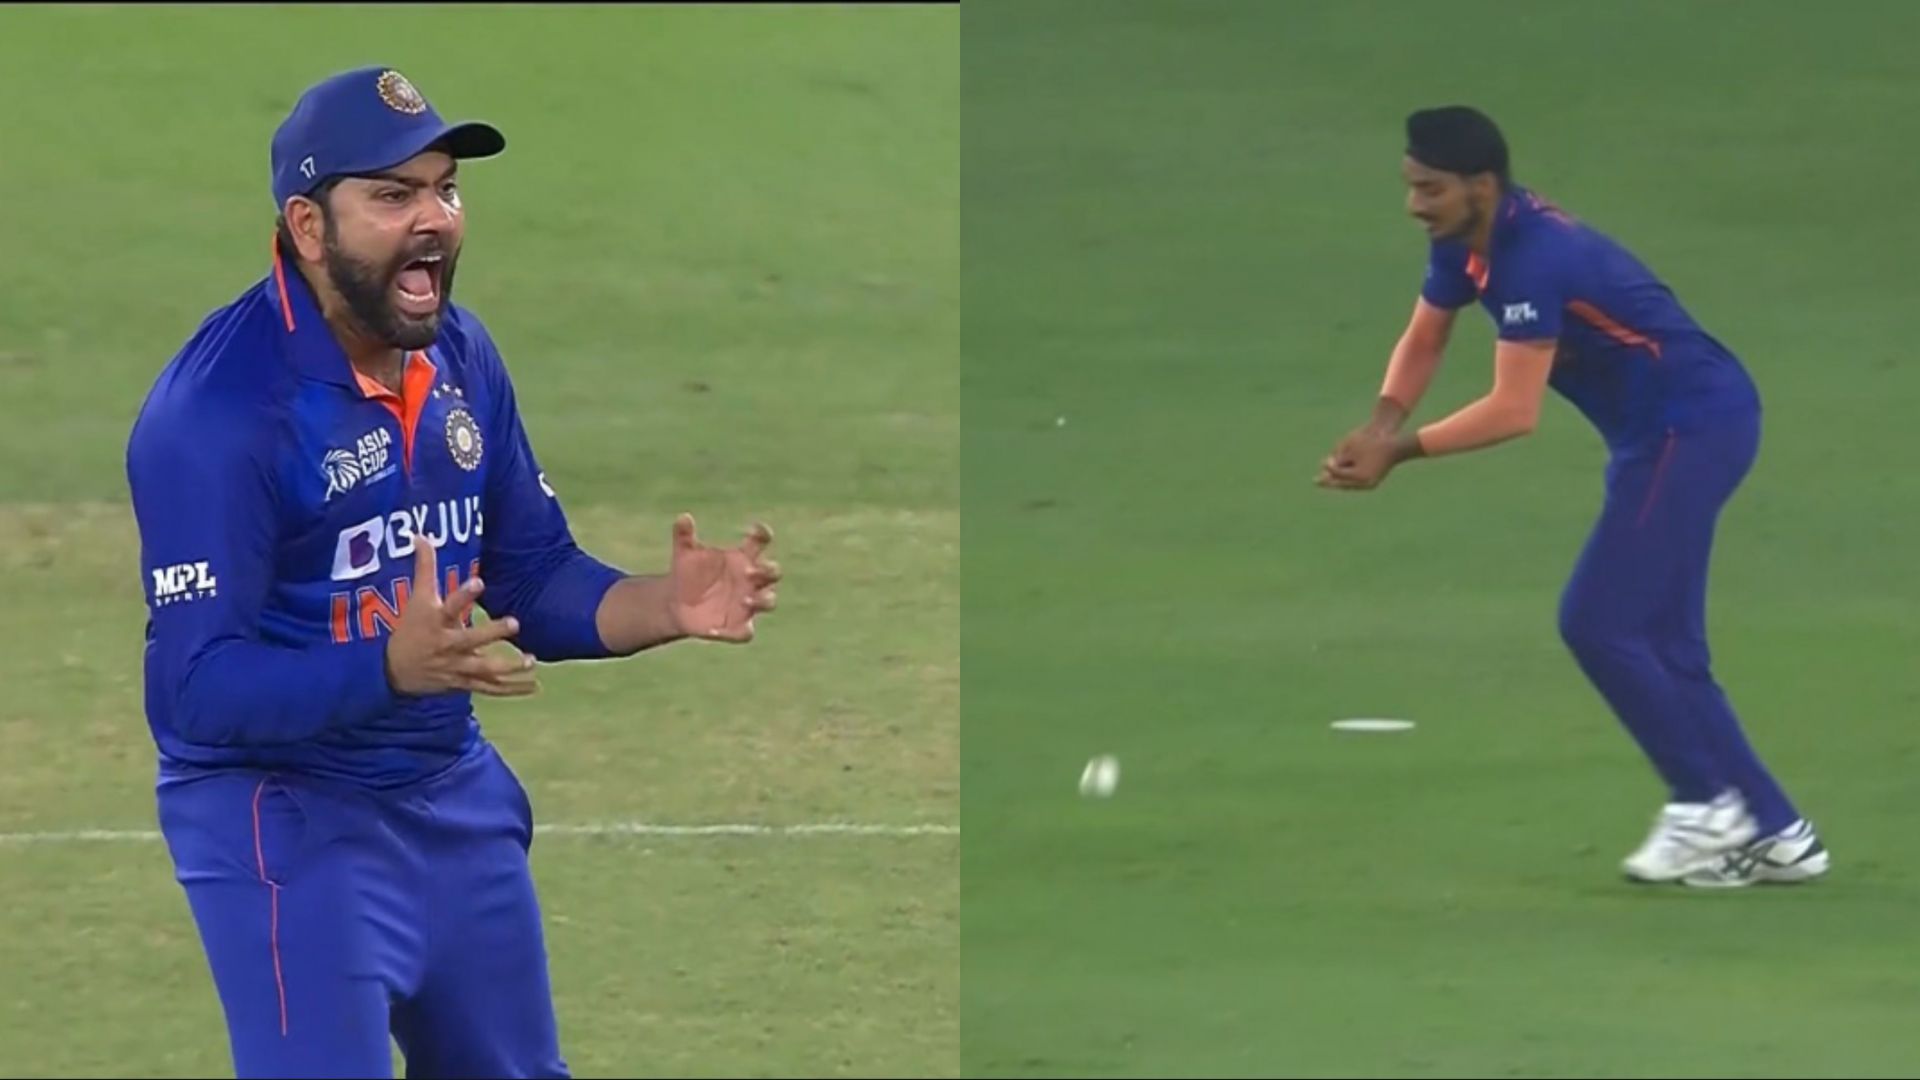 Rohit Sharma was not happy with the way Arshdeep Singh dropped the catch (Image: Disney+ Hotstar)